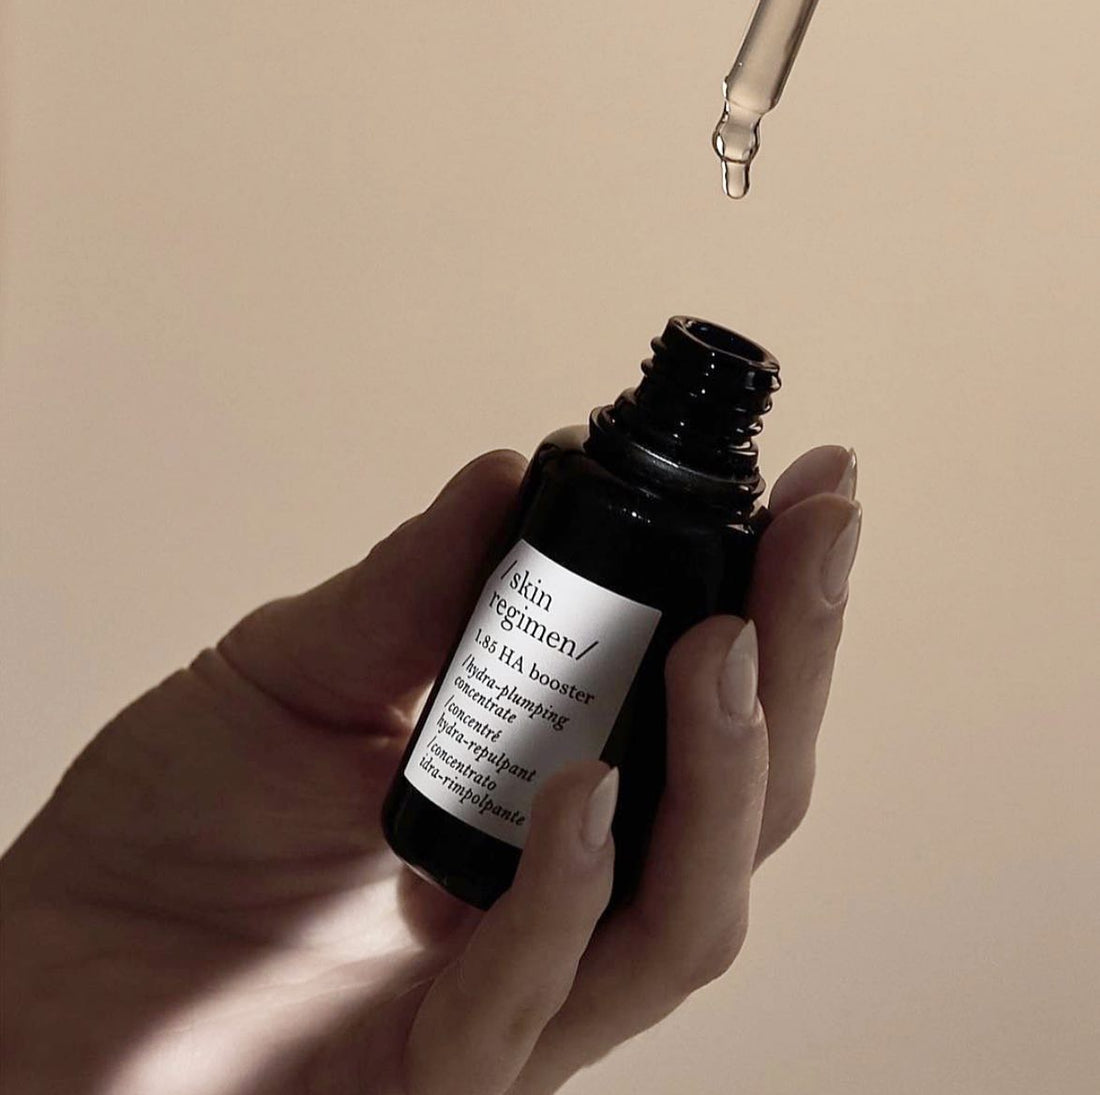 It’s time to add Hyaluronic Acid to your skincare routine!